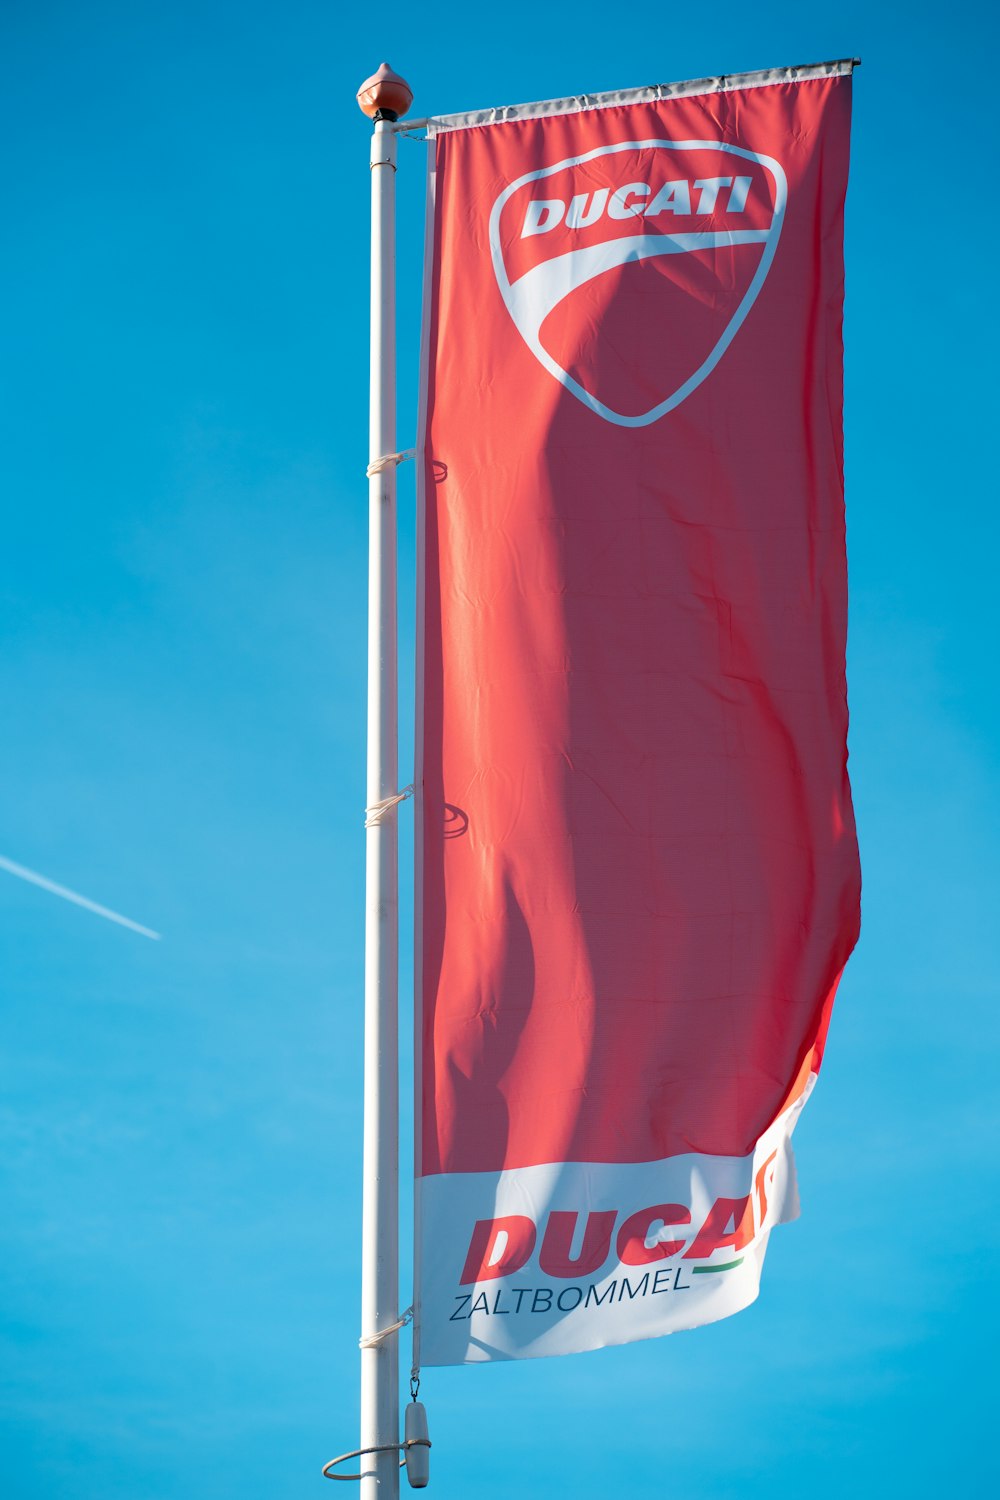 red and white flag under blue sky during daytime